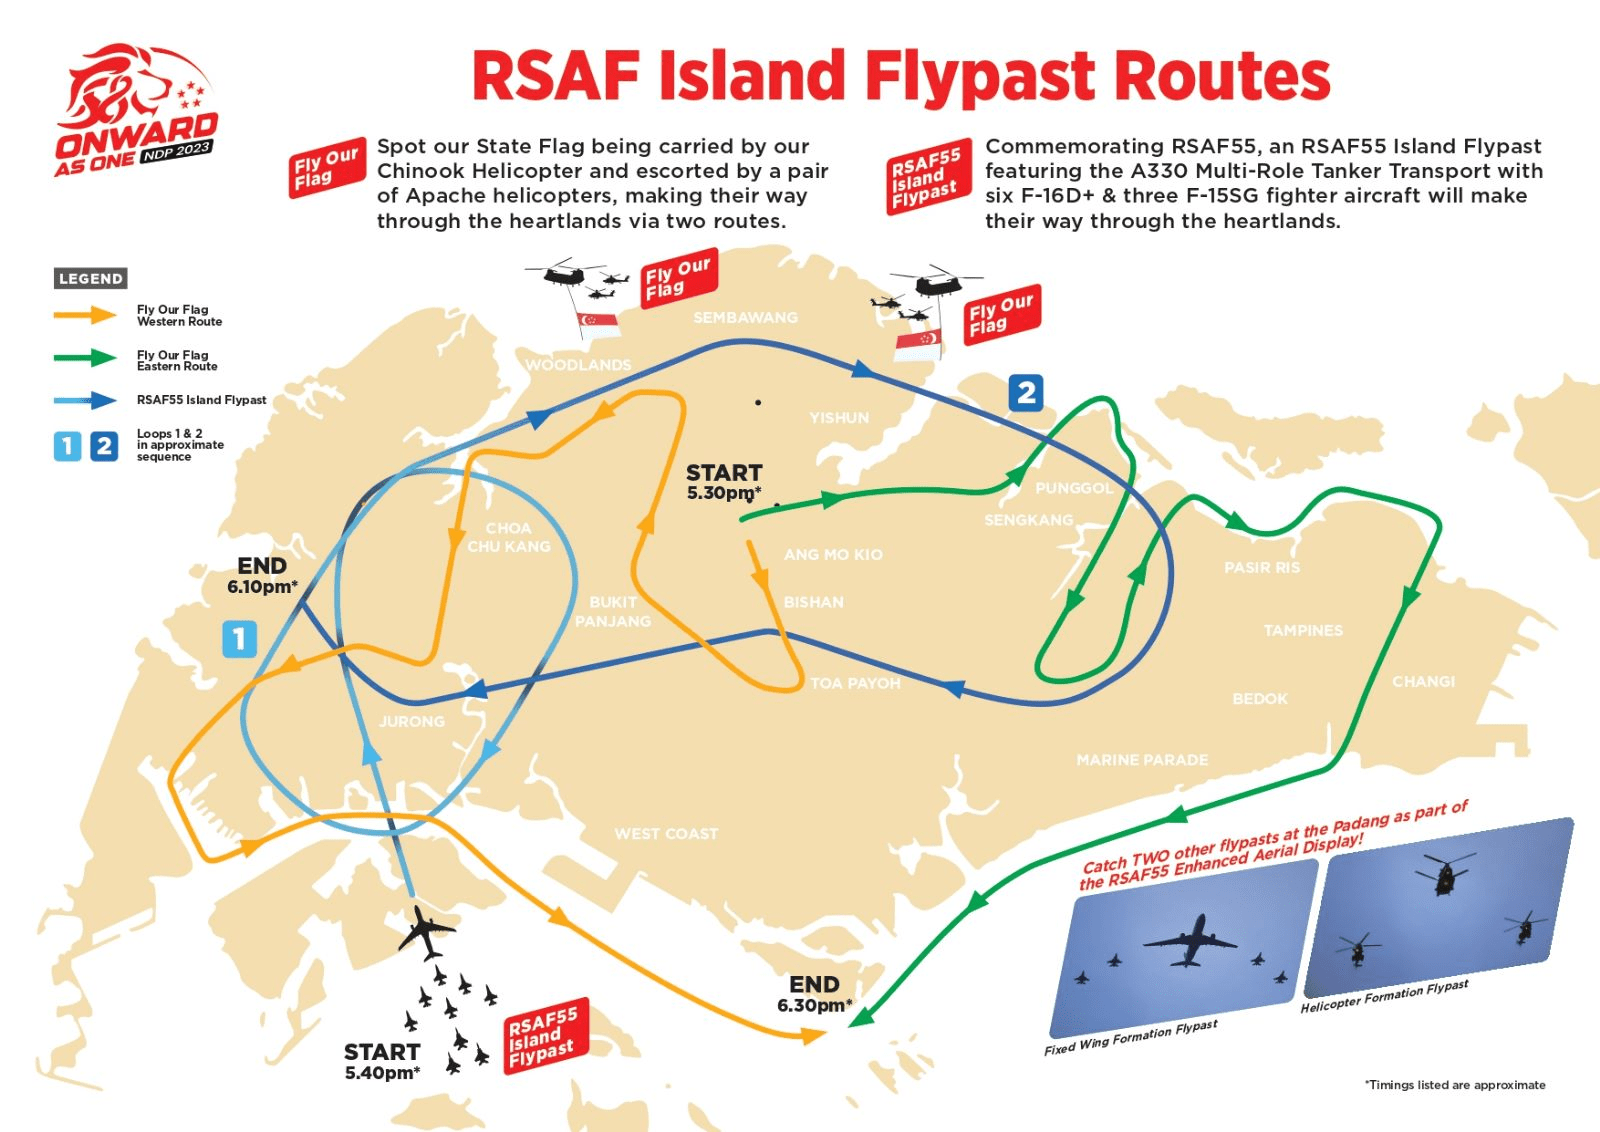 RSAF island flypast routes